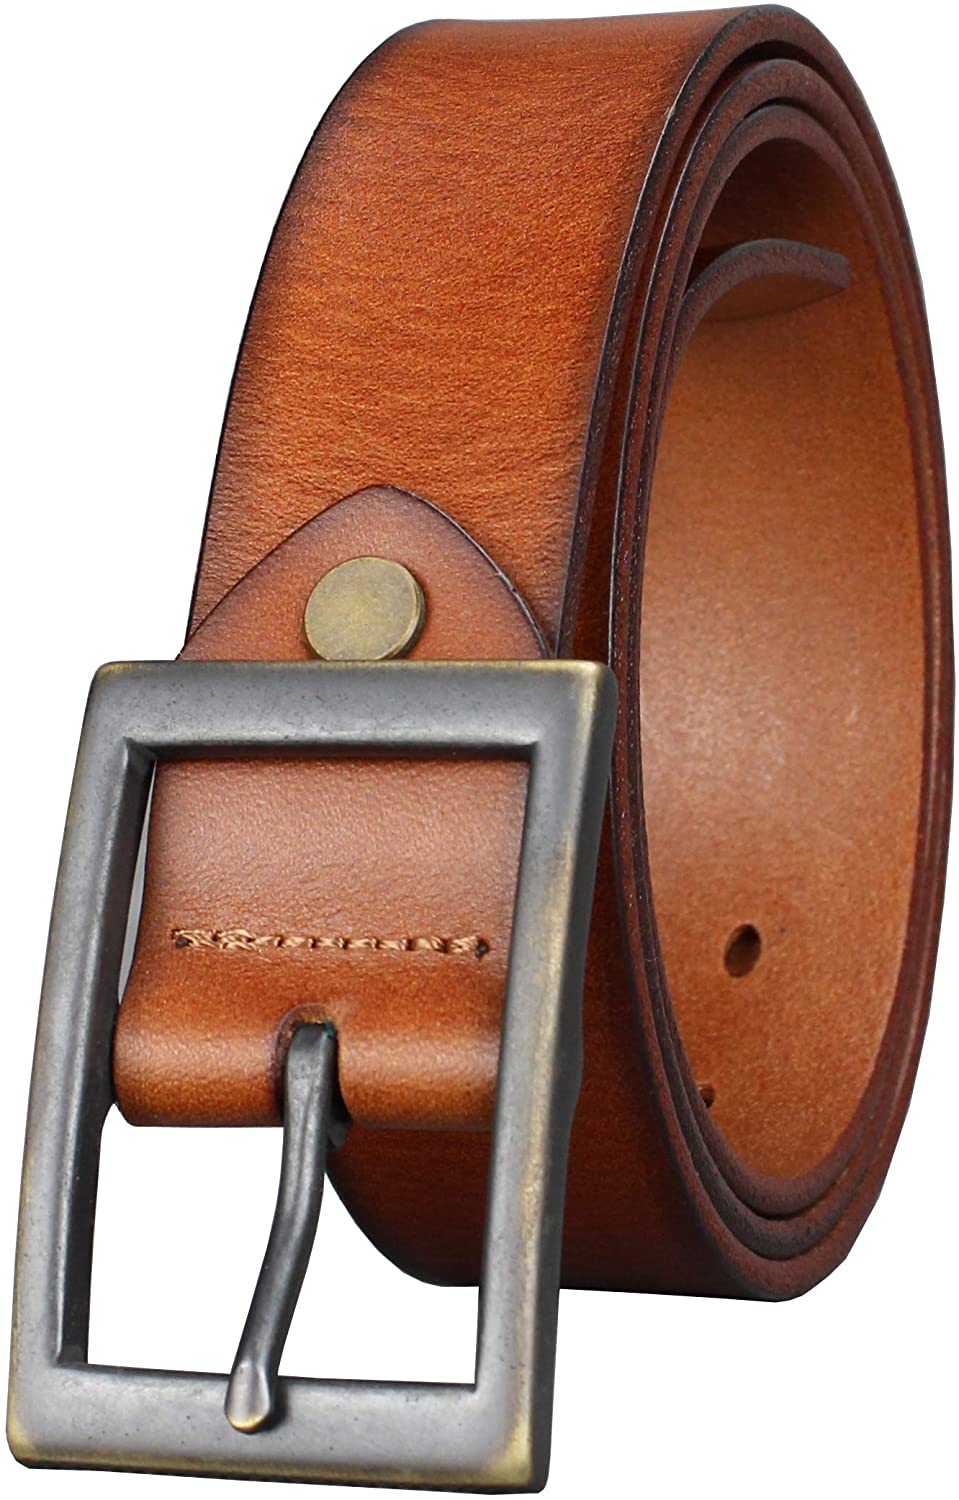 Bullko Men's Casual Genuine Leather Dress Belt With Jeans Classic Buckle